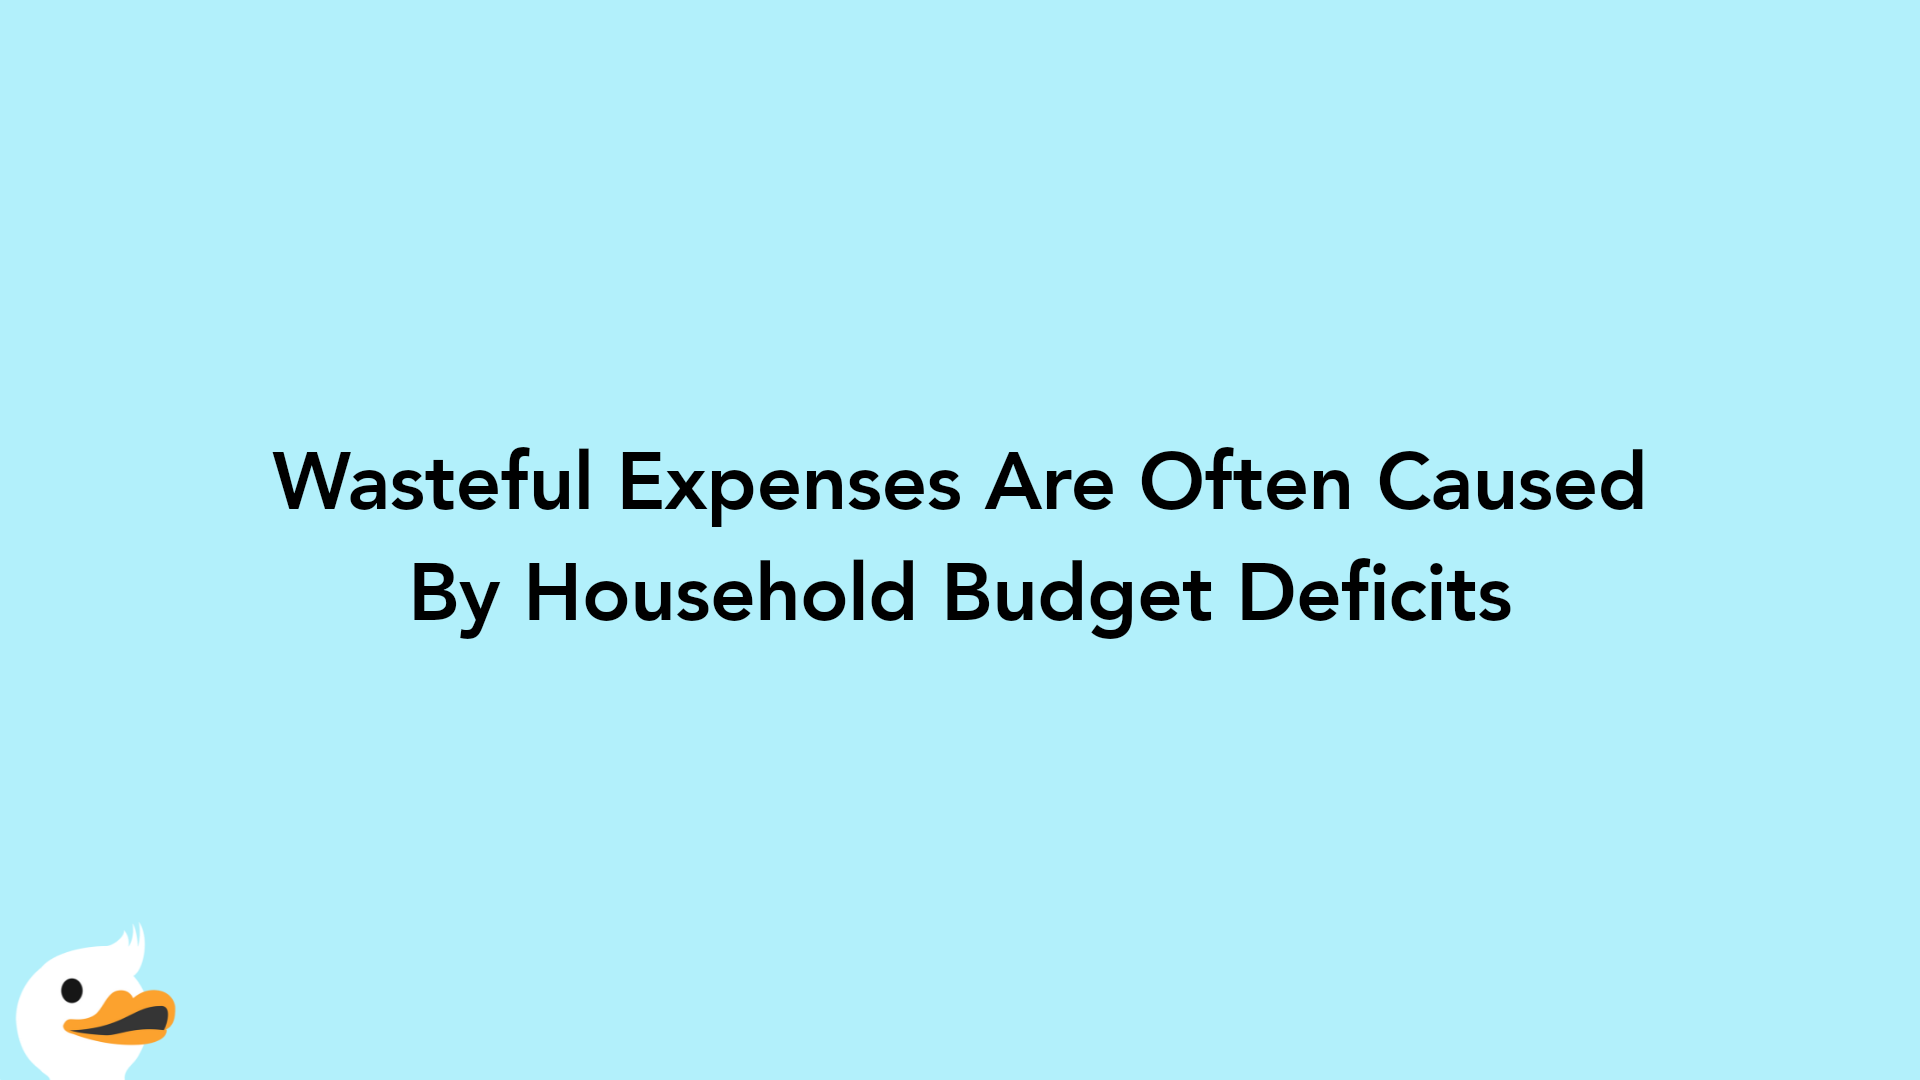 Wasteful Expenses Are Often Caused By Household Budget Deficits